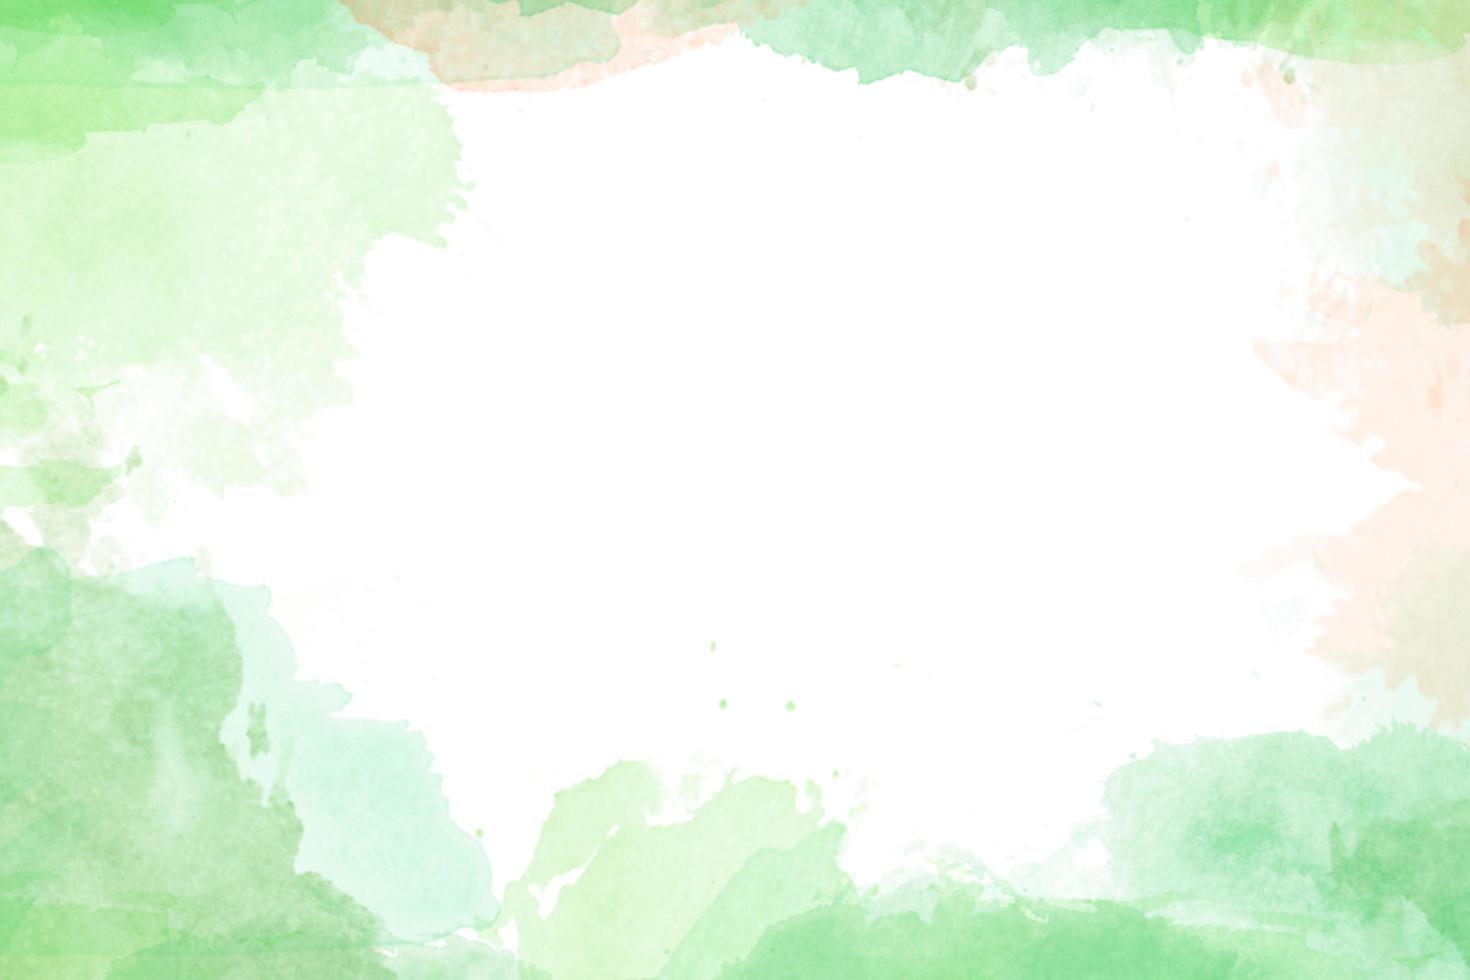 Watercolor Texture Brush Background Free Image photo